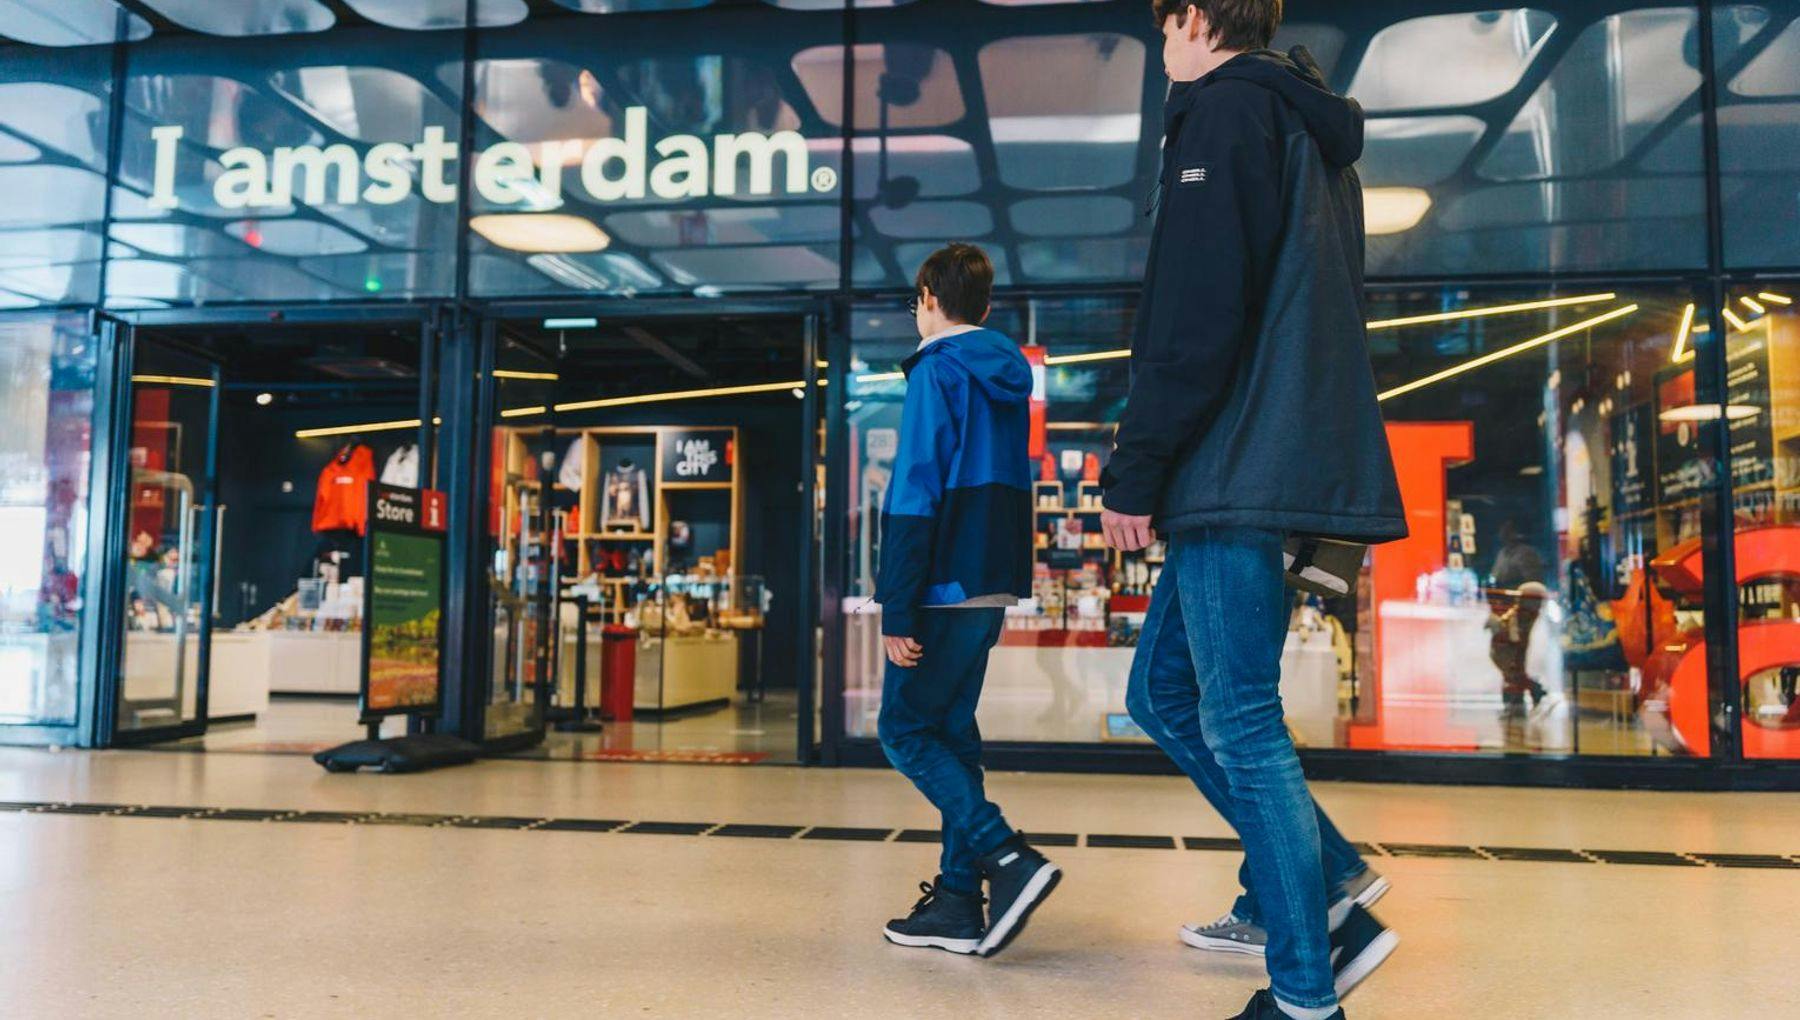 Two boys about to enter the Iamsterdam Store at Amsterdam Central Station.